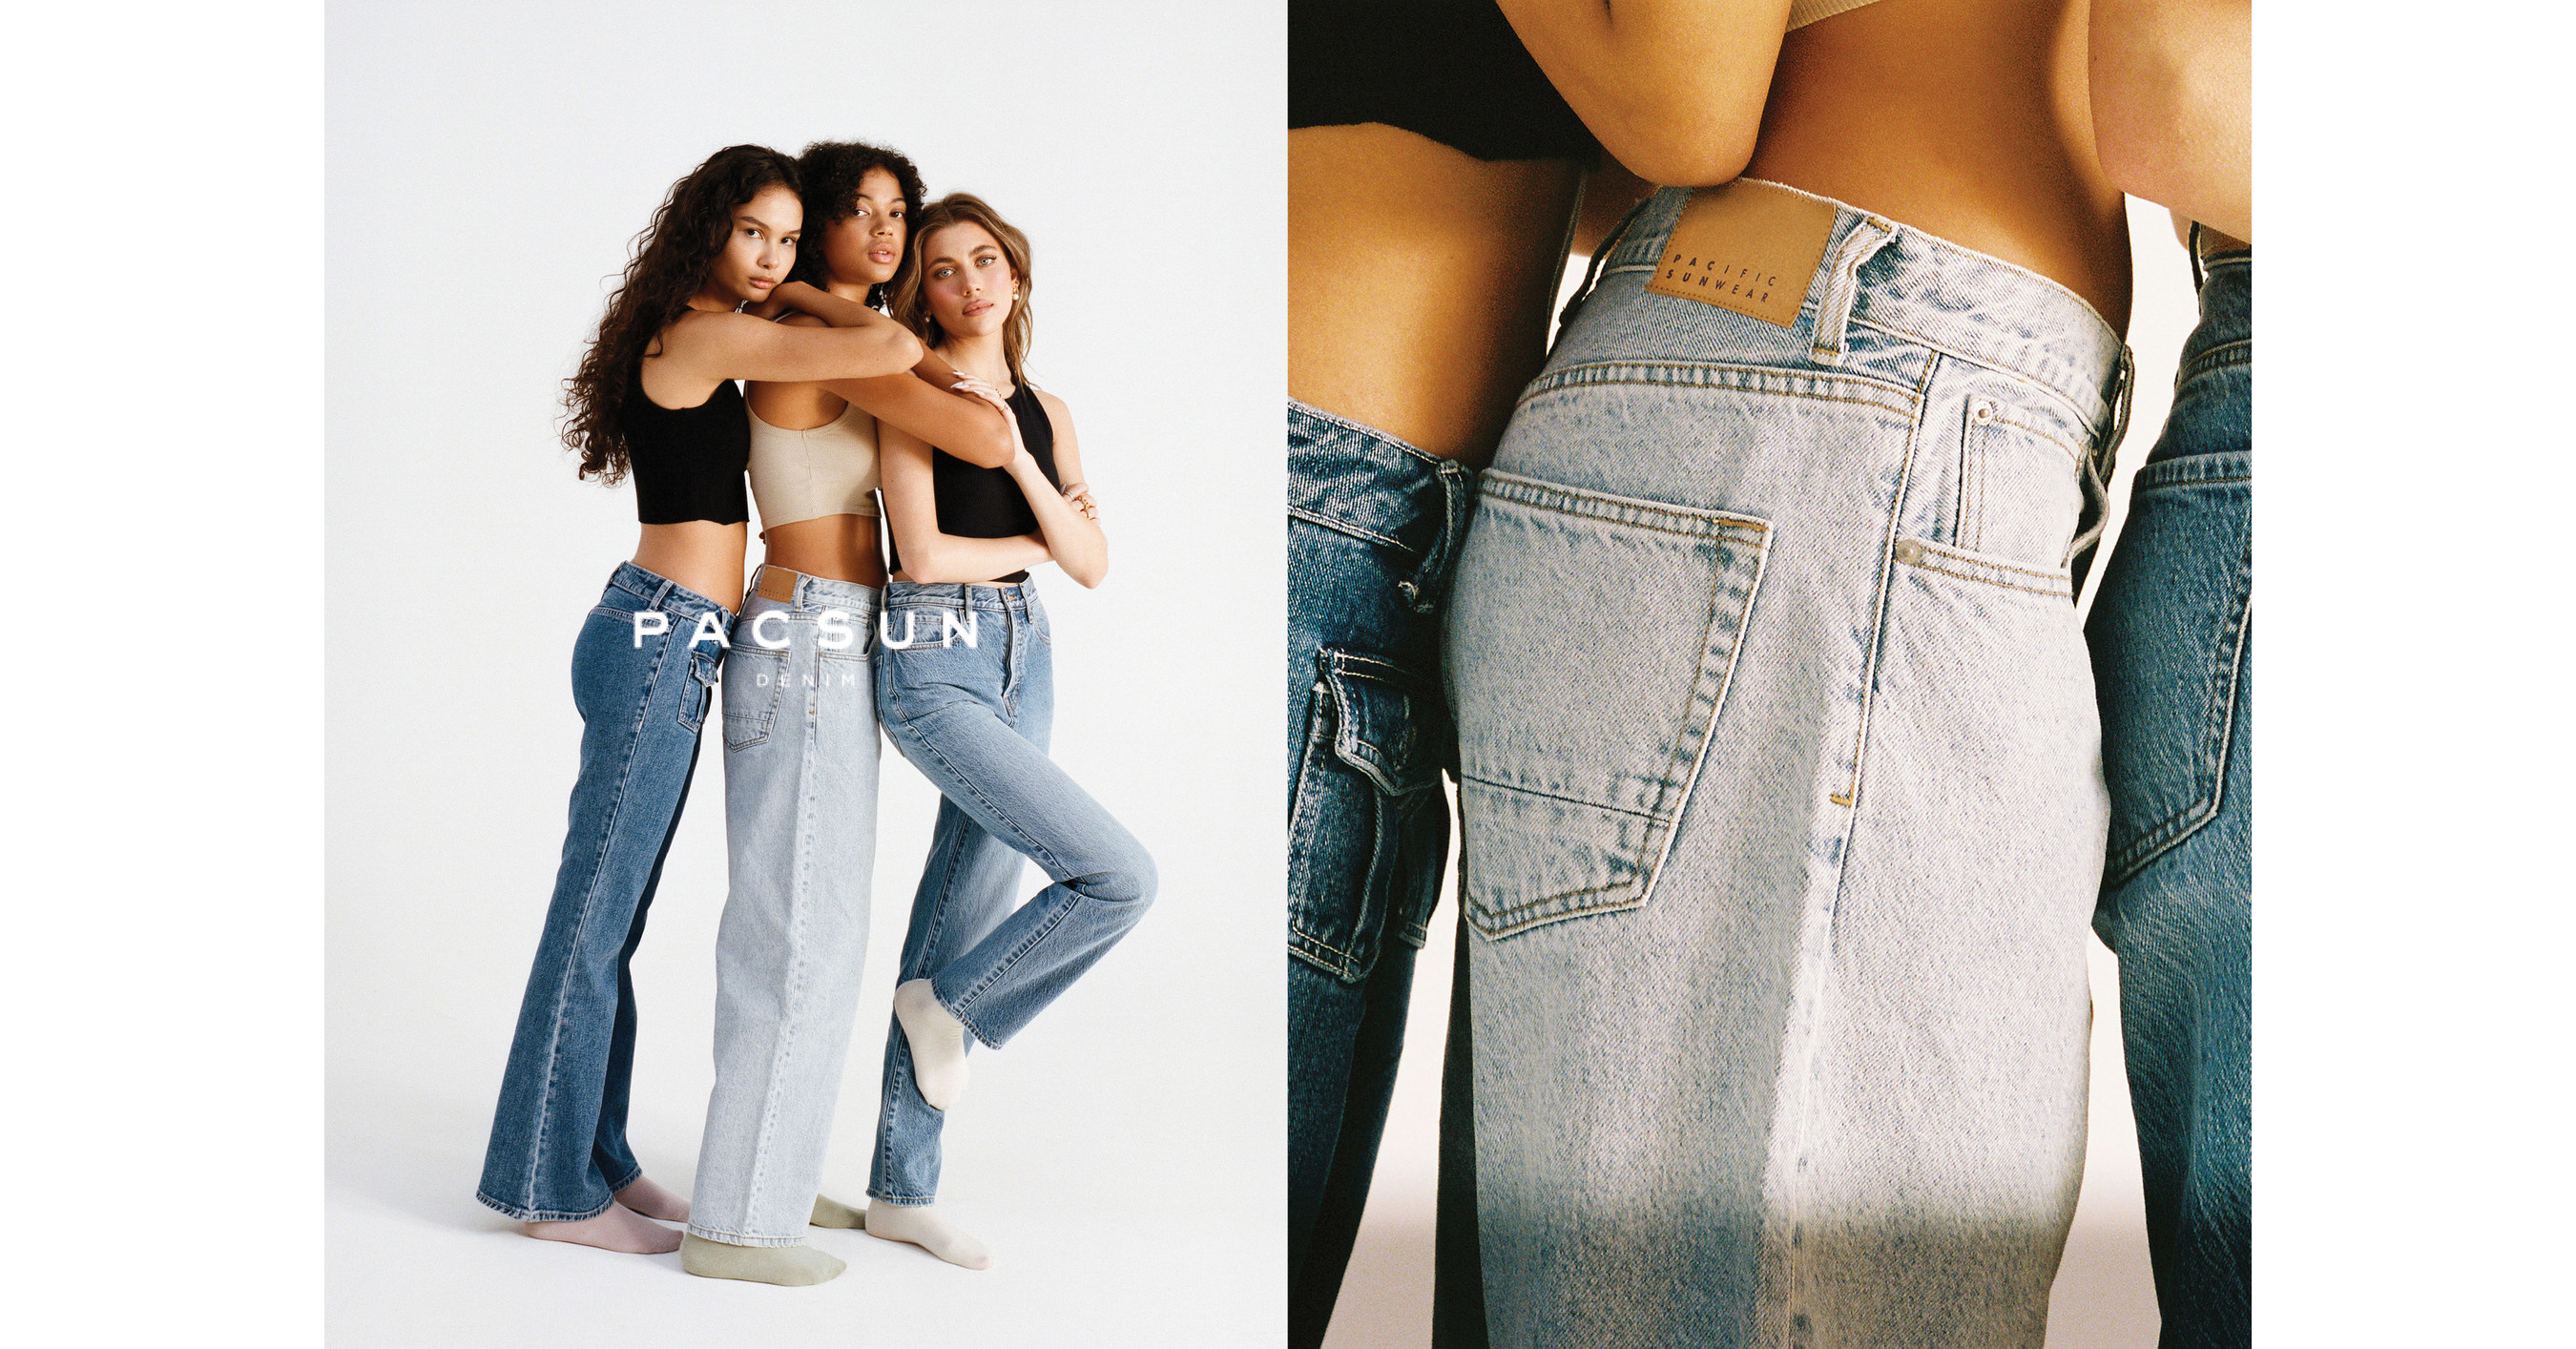 Pacsun Introduces 'PacDenim For A Better Tomorrow' Initiative